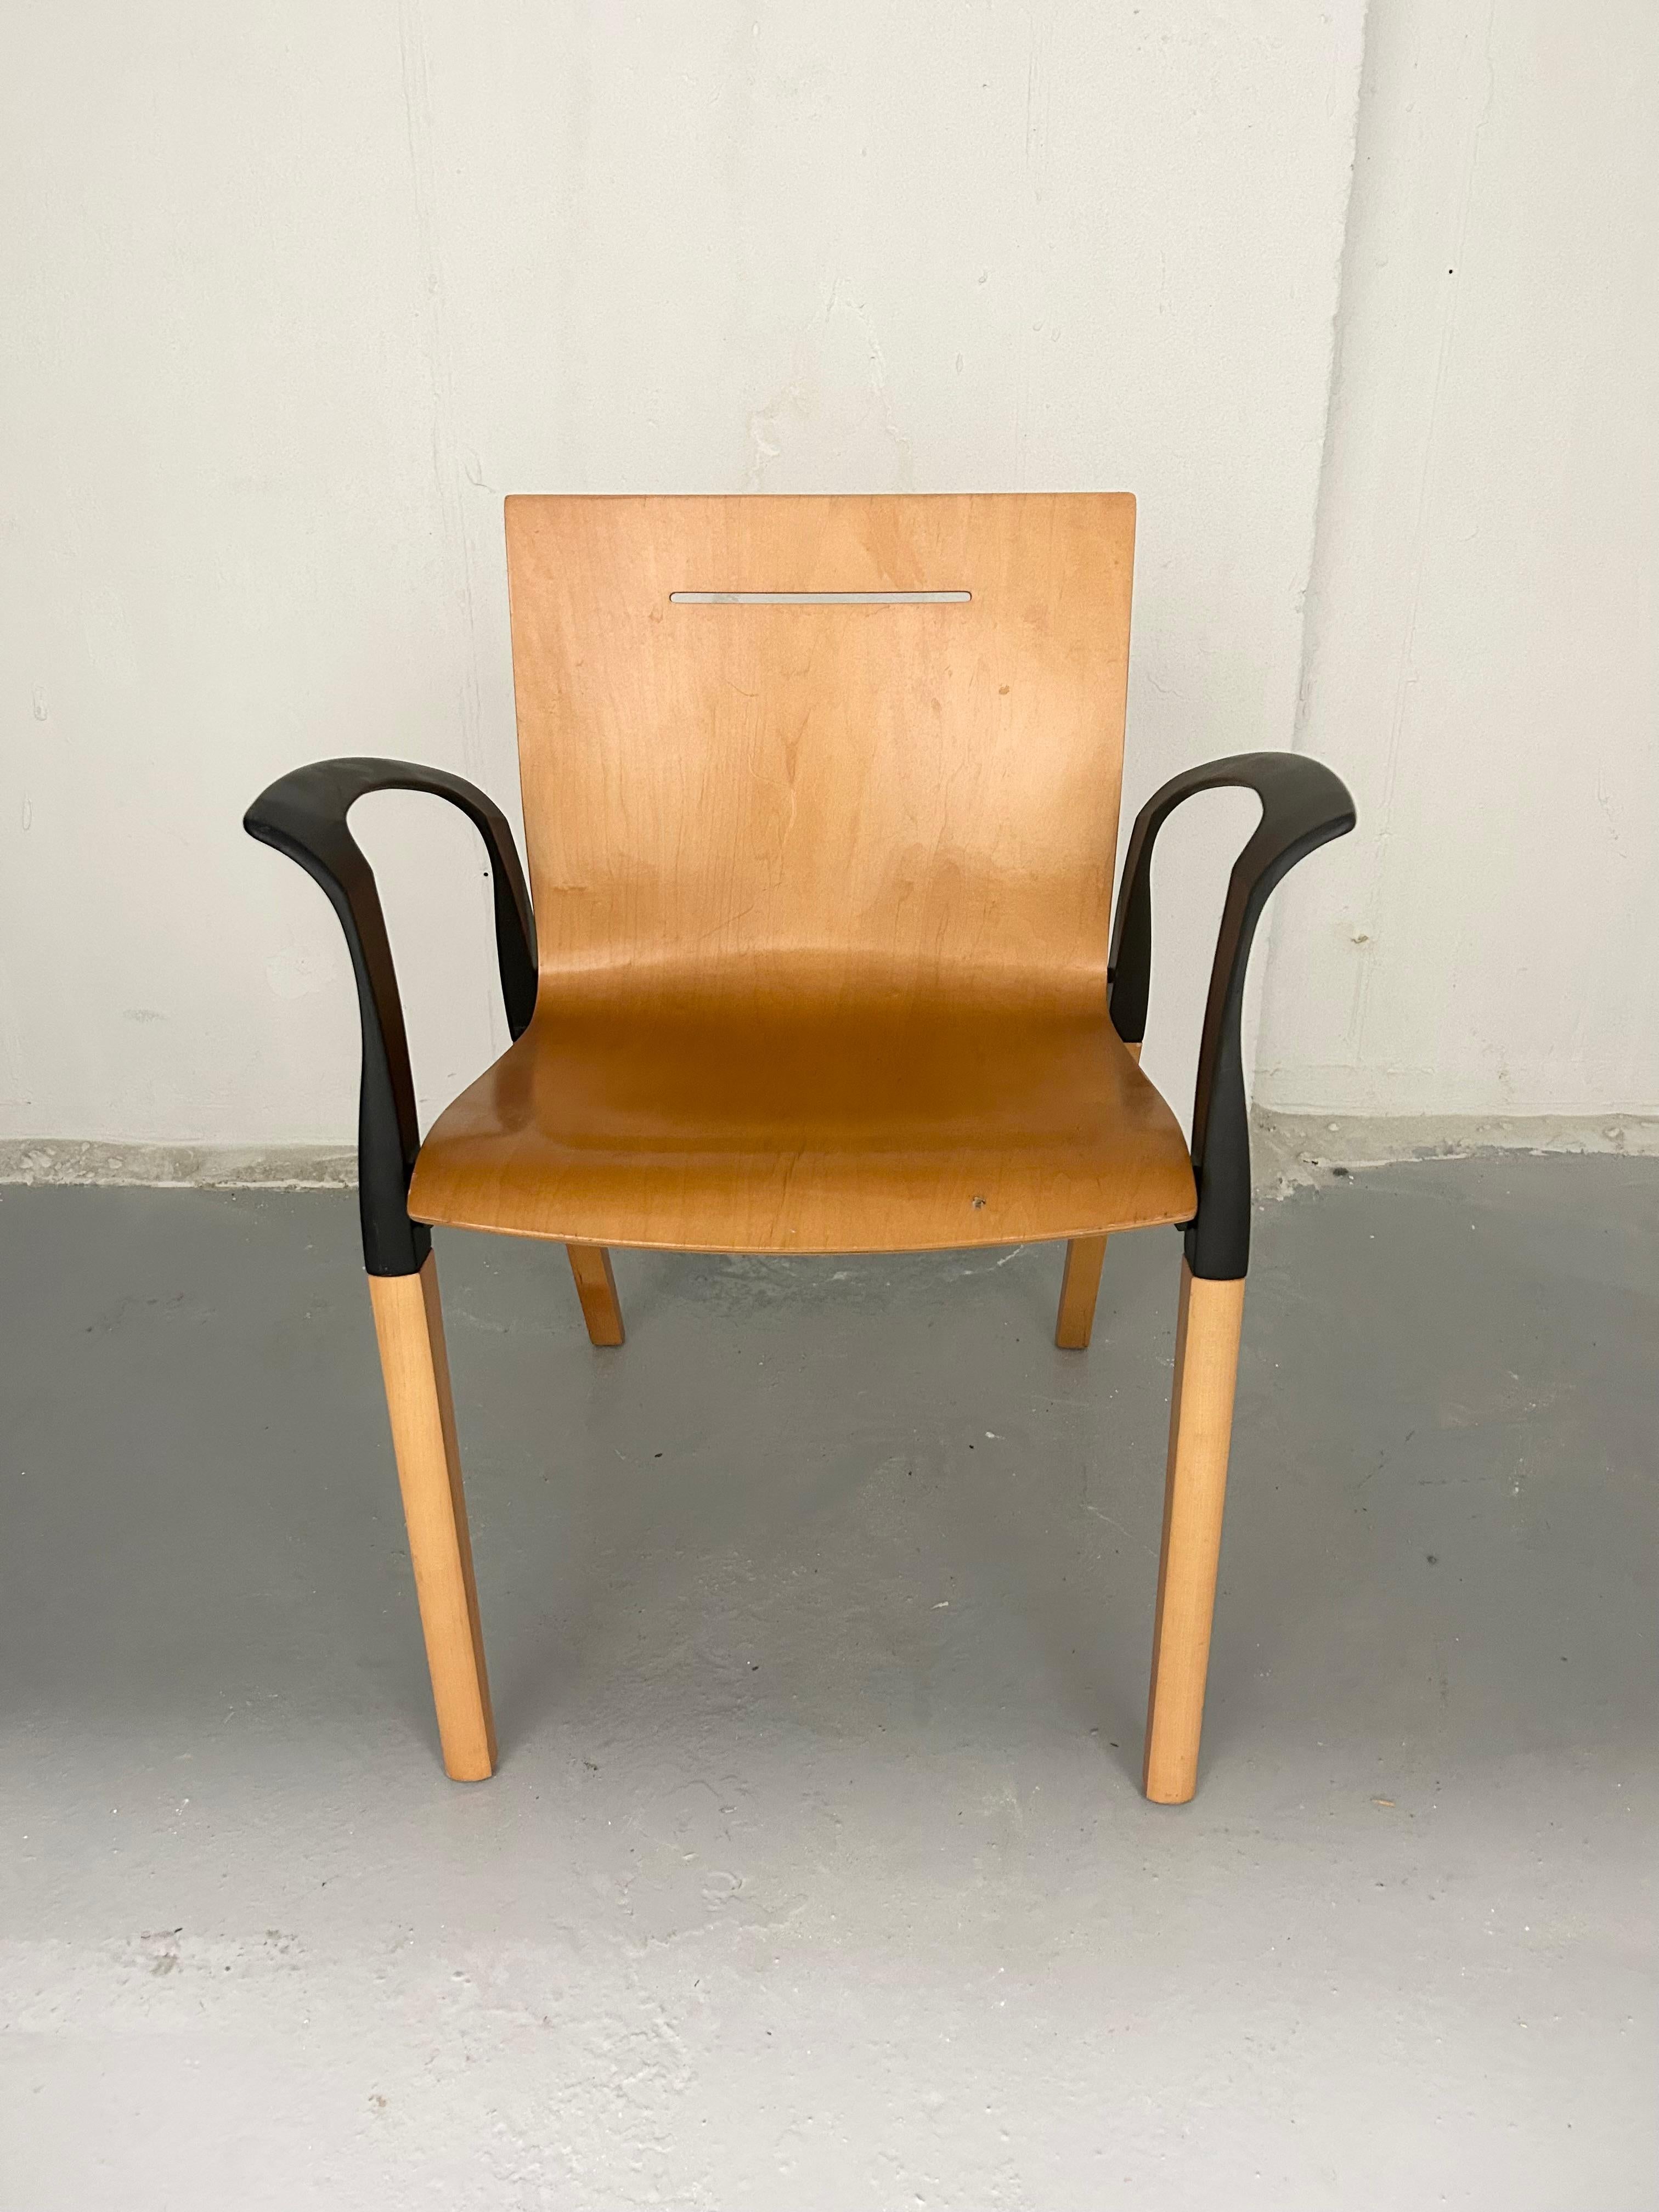 Contemporary Bentwood Steelcase Chair